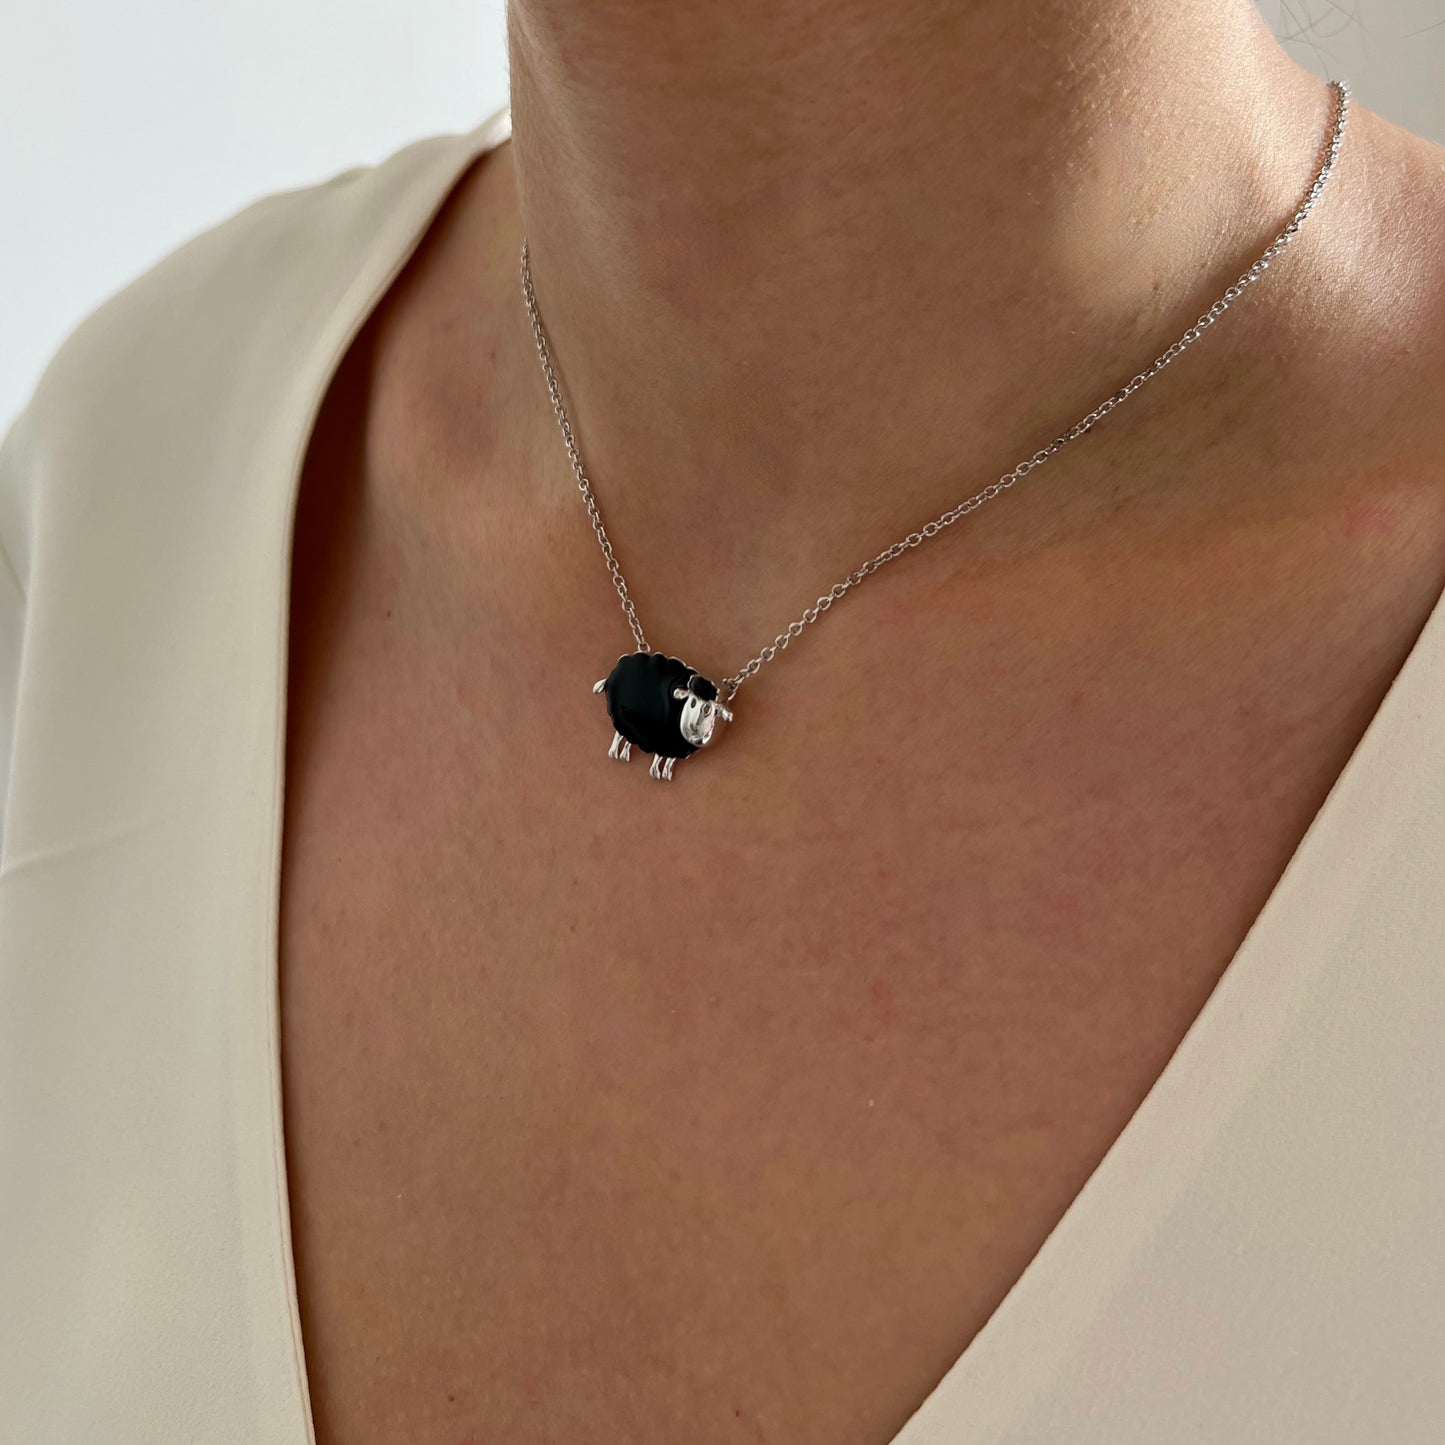 Black sheep necklace in silver and enamel